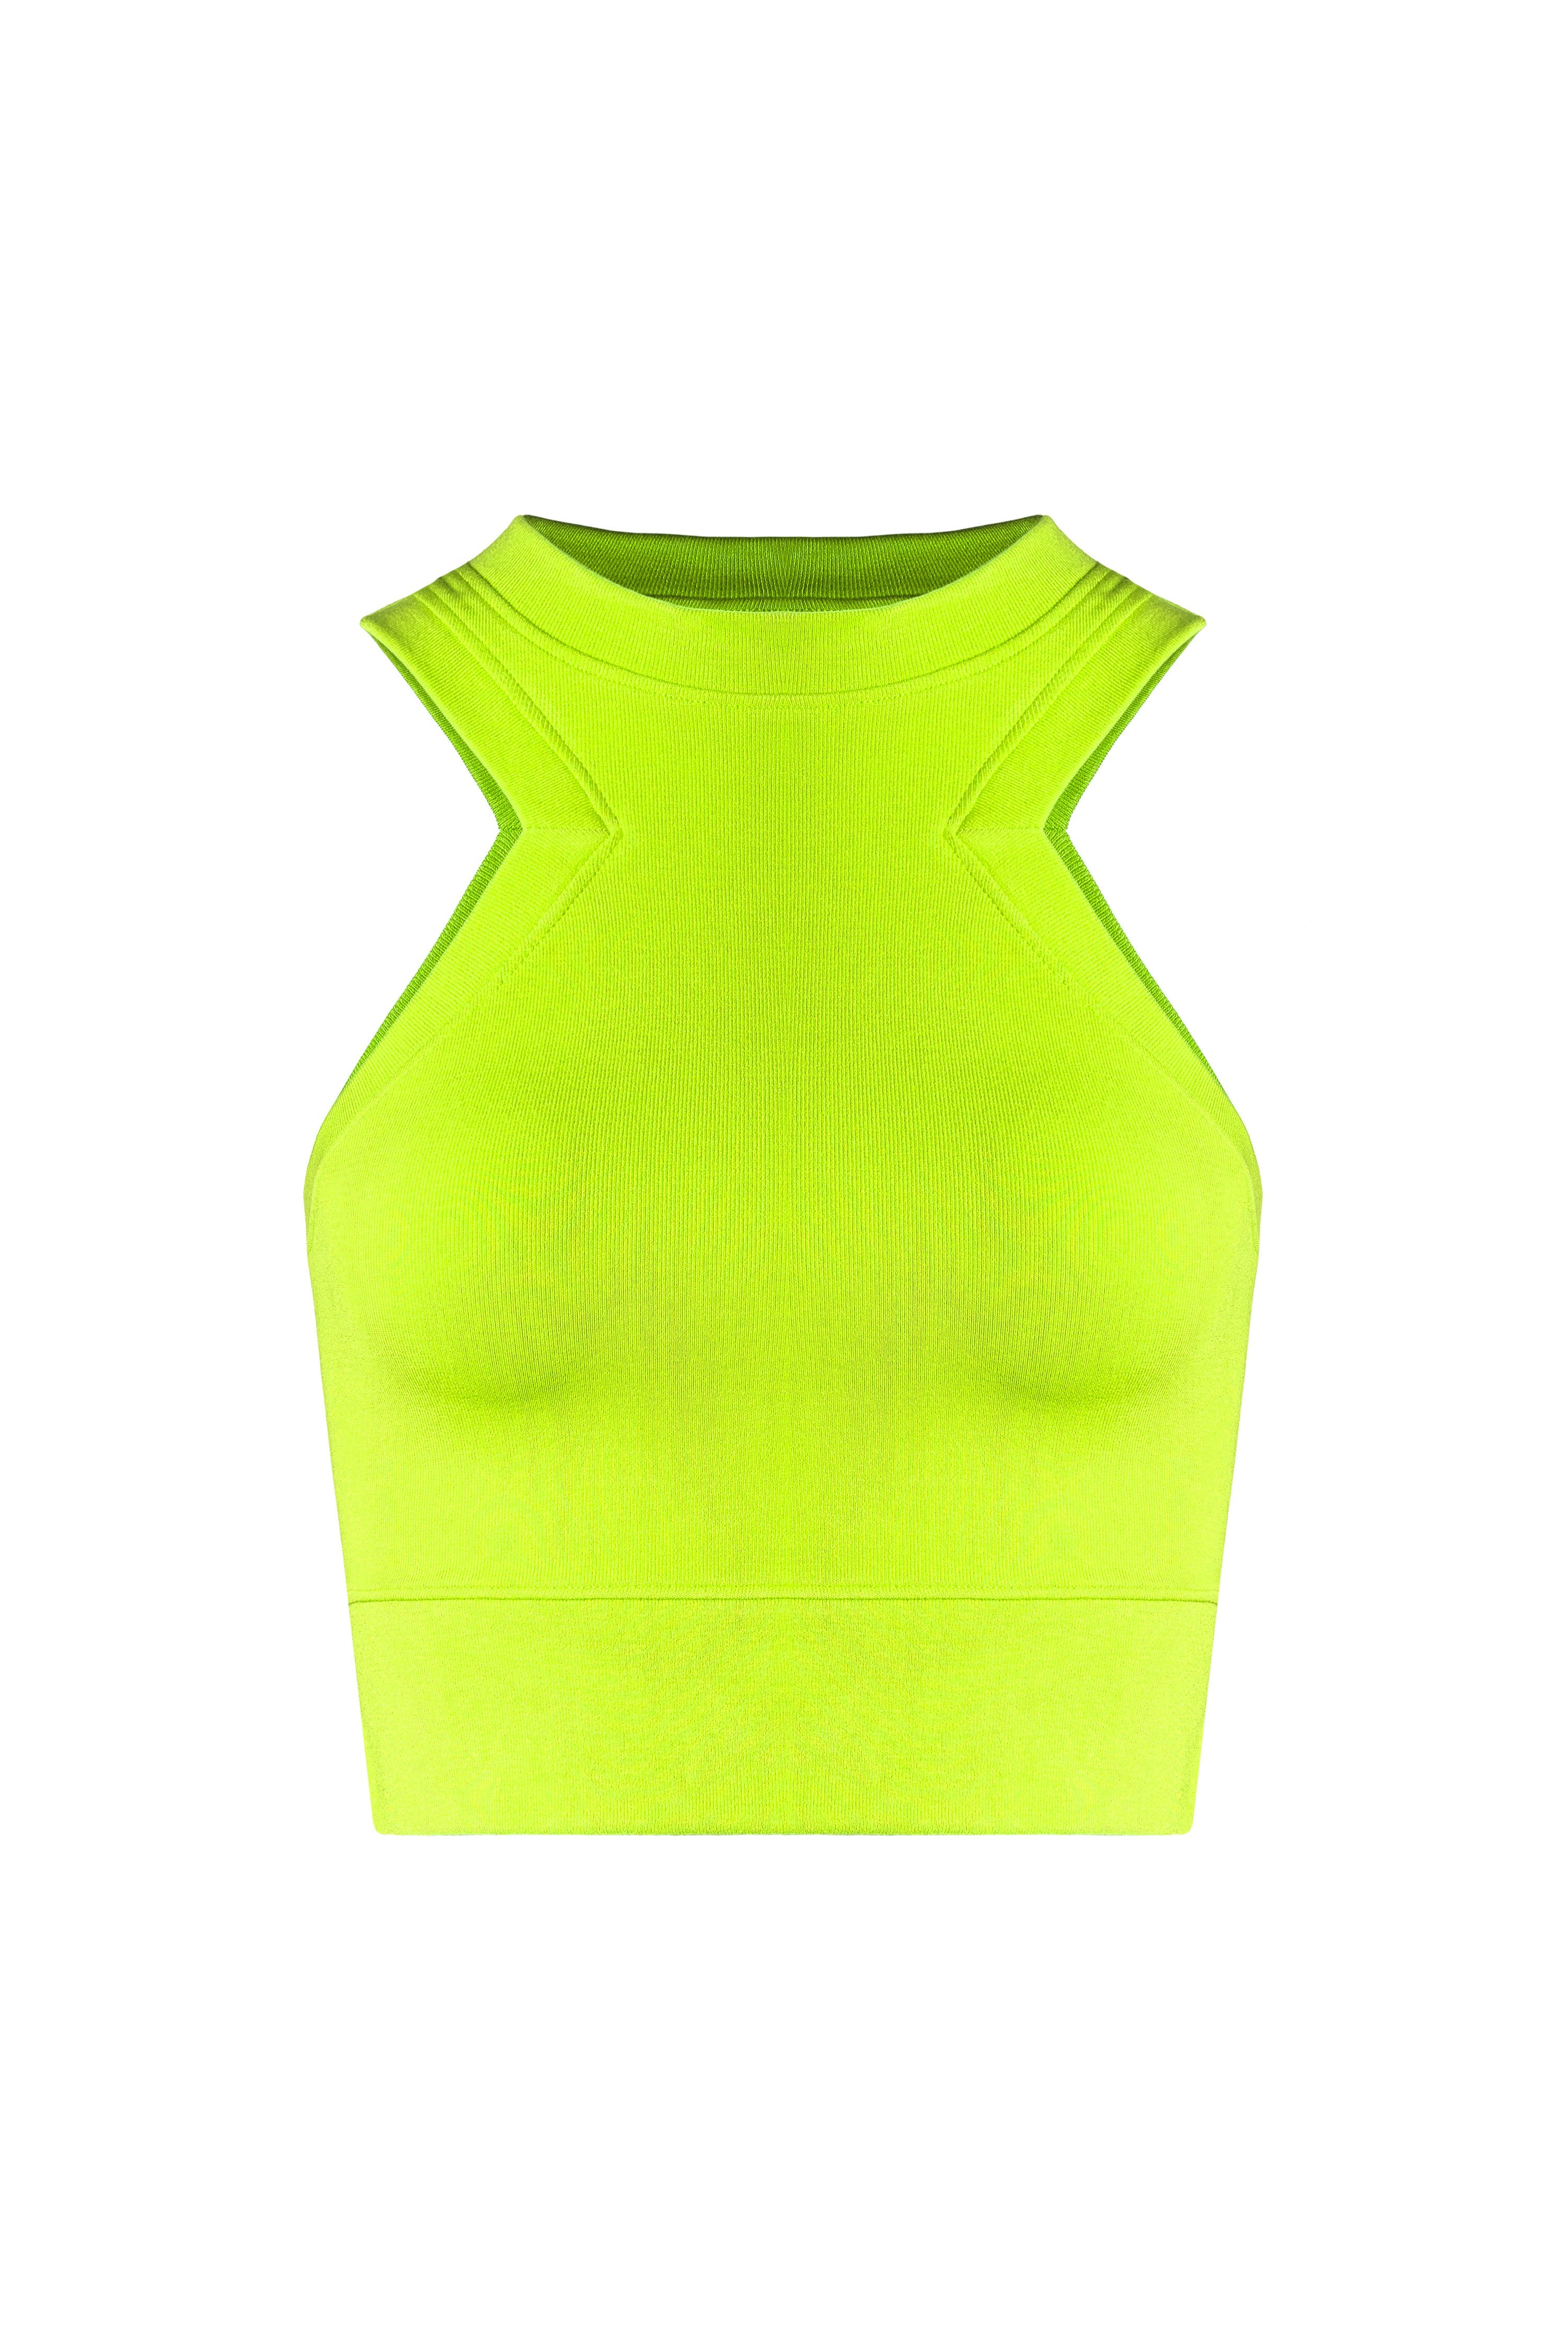 Lime Carved Triangular Armhole Banded Crop Tank | Collective Request 